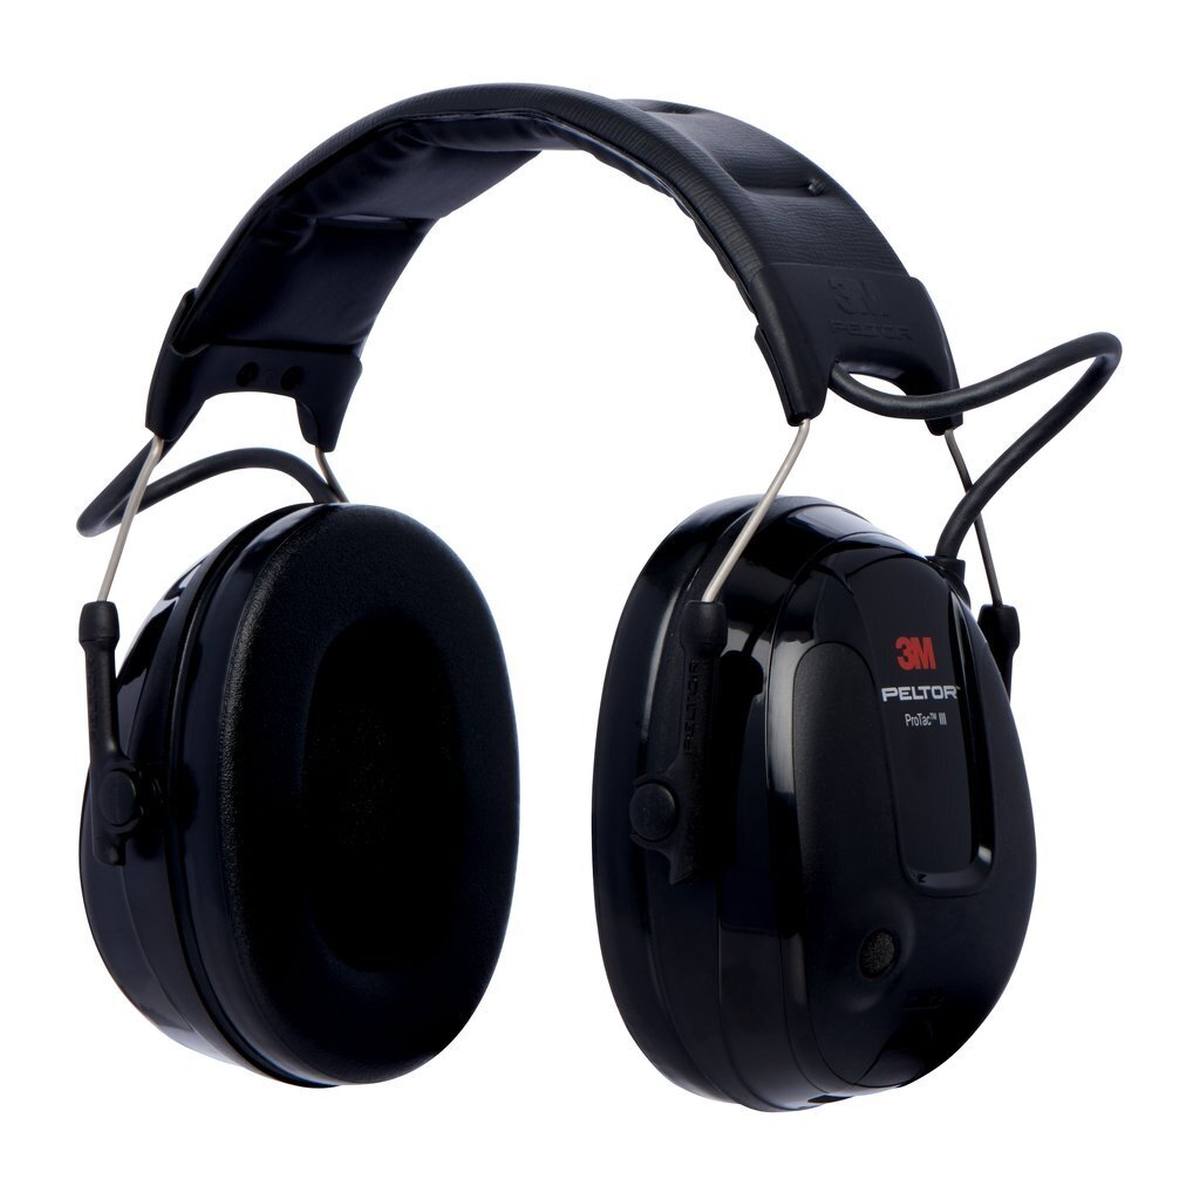 3M PELTOR ProTac III Slim hearing protection headset, black, headband, with active, level-dependent attenuation technology for perceiving ambient noise, SNR=26 dB, black